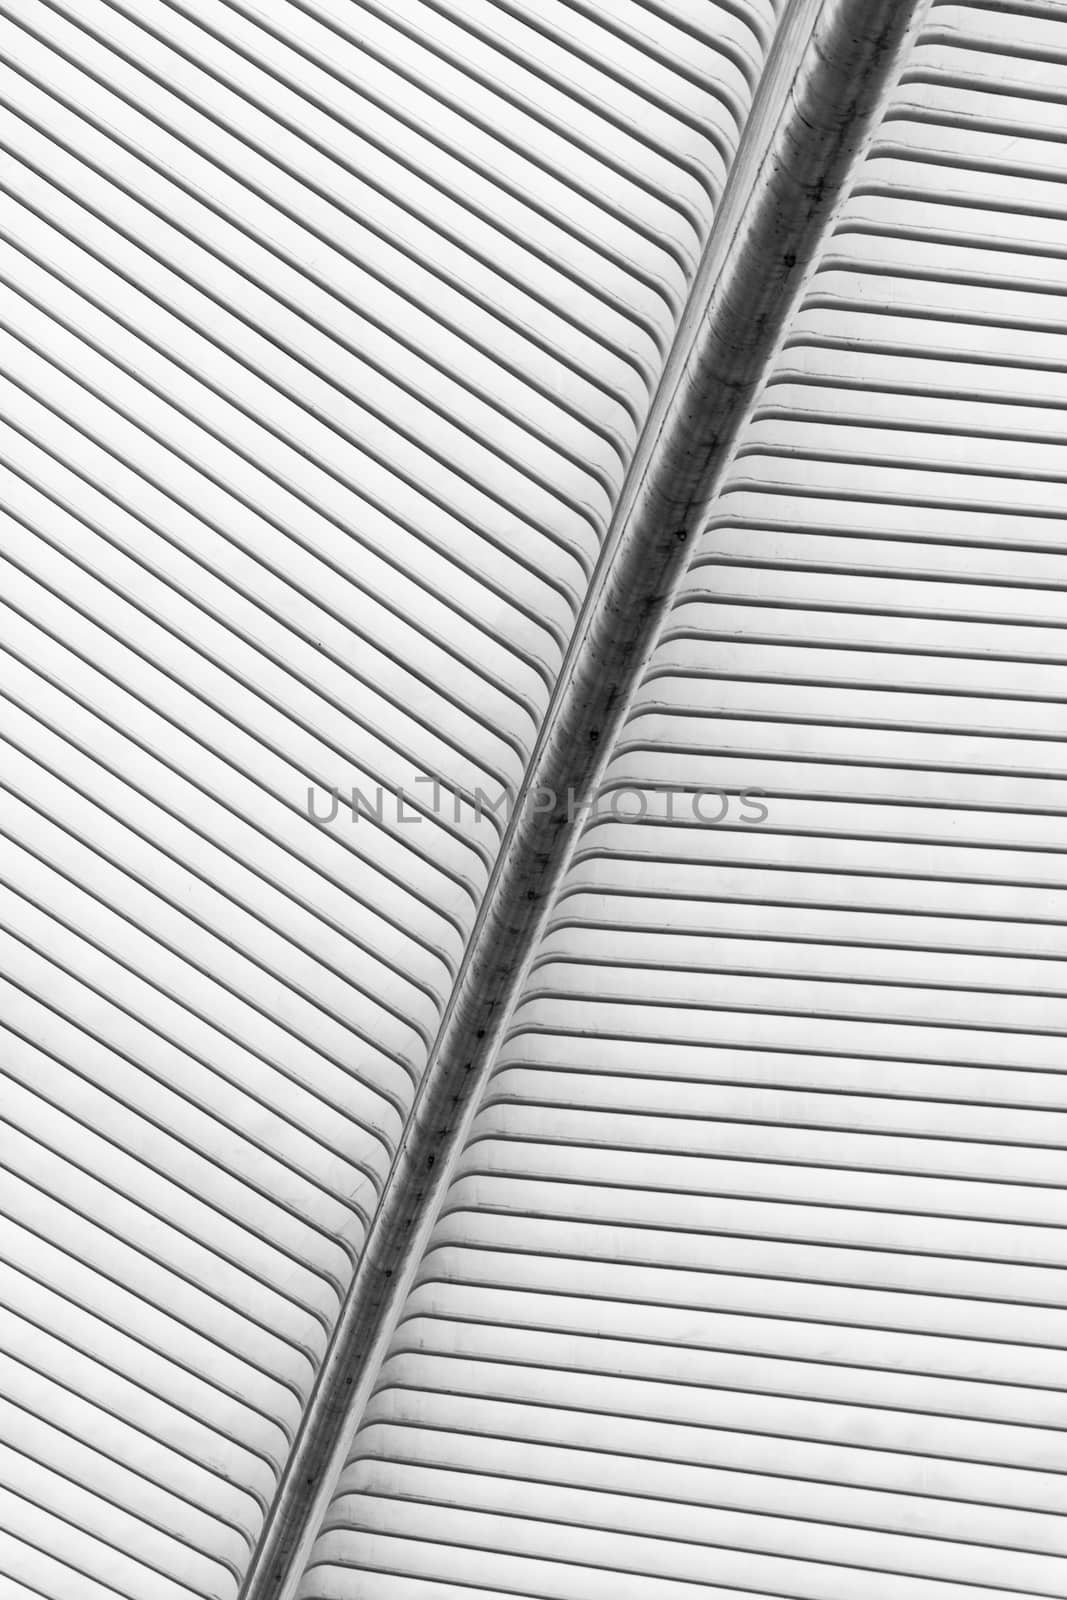 Steel roof structure of liege guillemins railway station by MXW_Stock